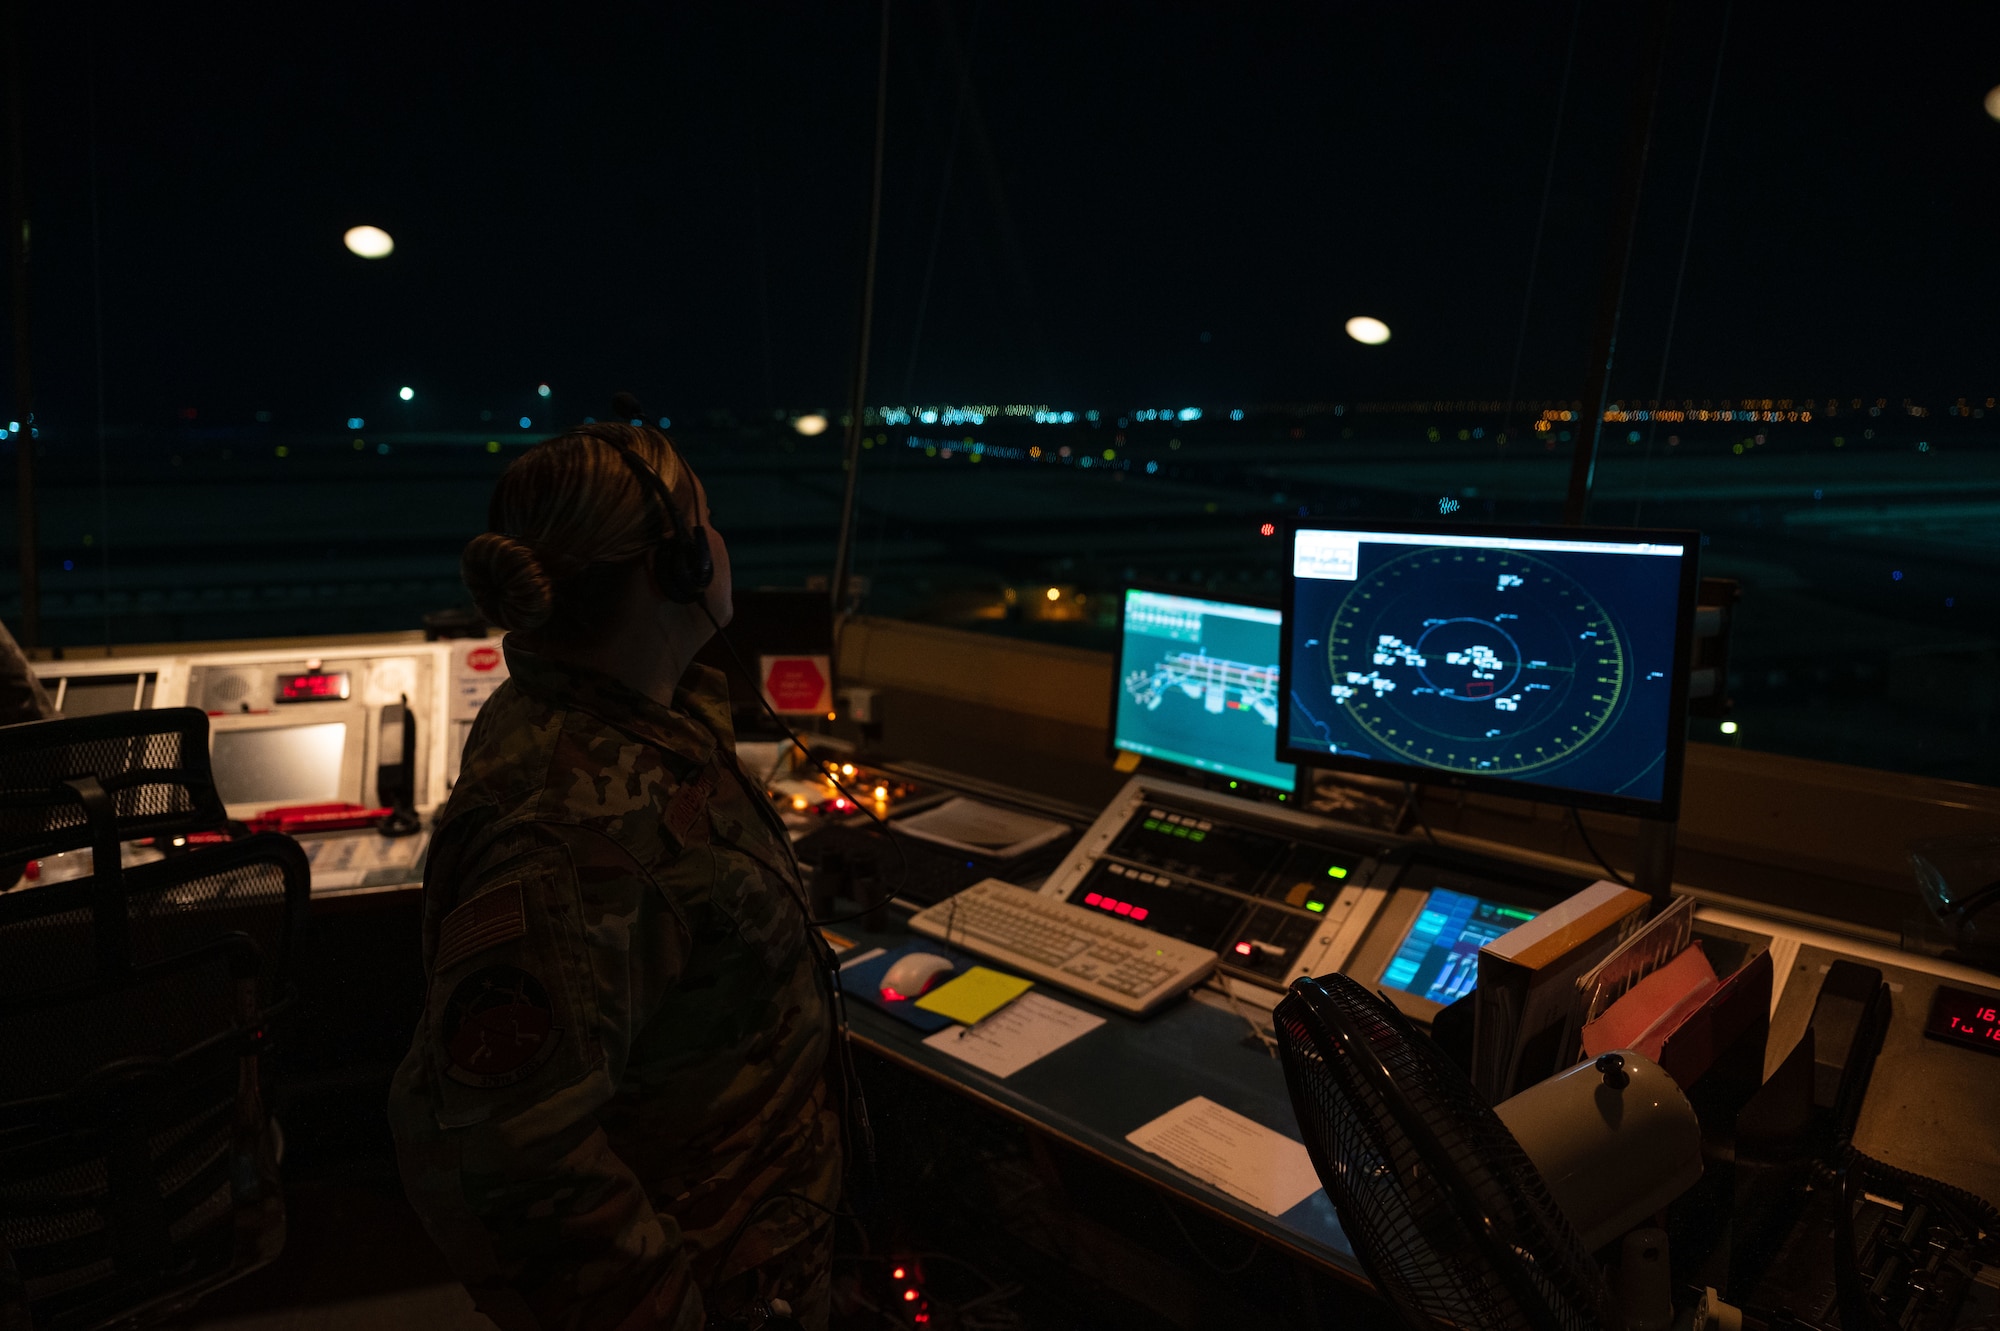 U.S. Air Force Tech Sgt. Ashley Stainbrook, air traffic watch supervisor, surveys the radar screen and skies around the control tower, Aug 16, 2022 at Al Udeid Air Base, Qatar. Stainbrook oversees all operations in the control tower and helps foster a positive relationship with partner air traffic controllers in the Qatar Emiri Air Force. (U.S. Air Force photo by Staff Sgt. Dana Tourtellotte)